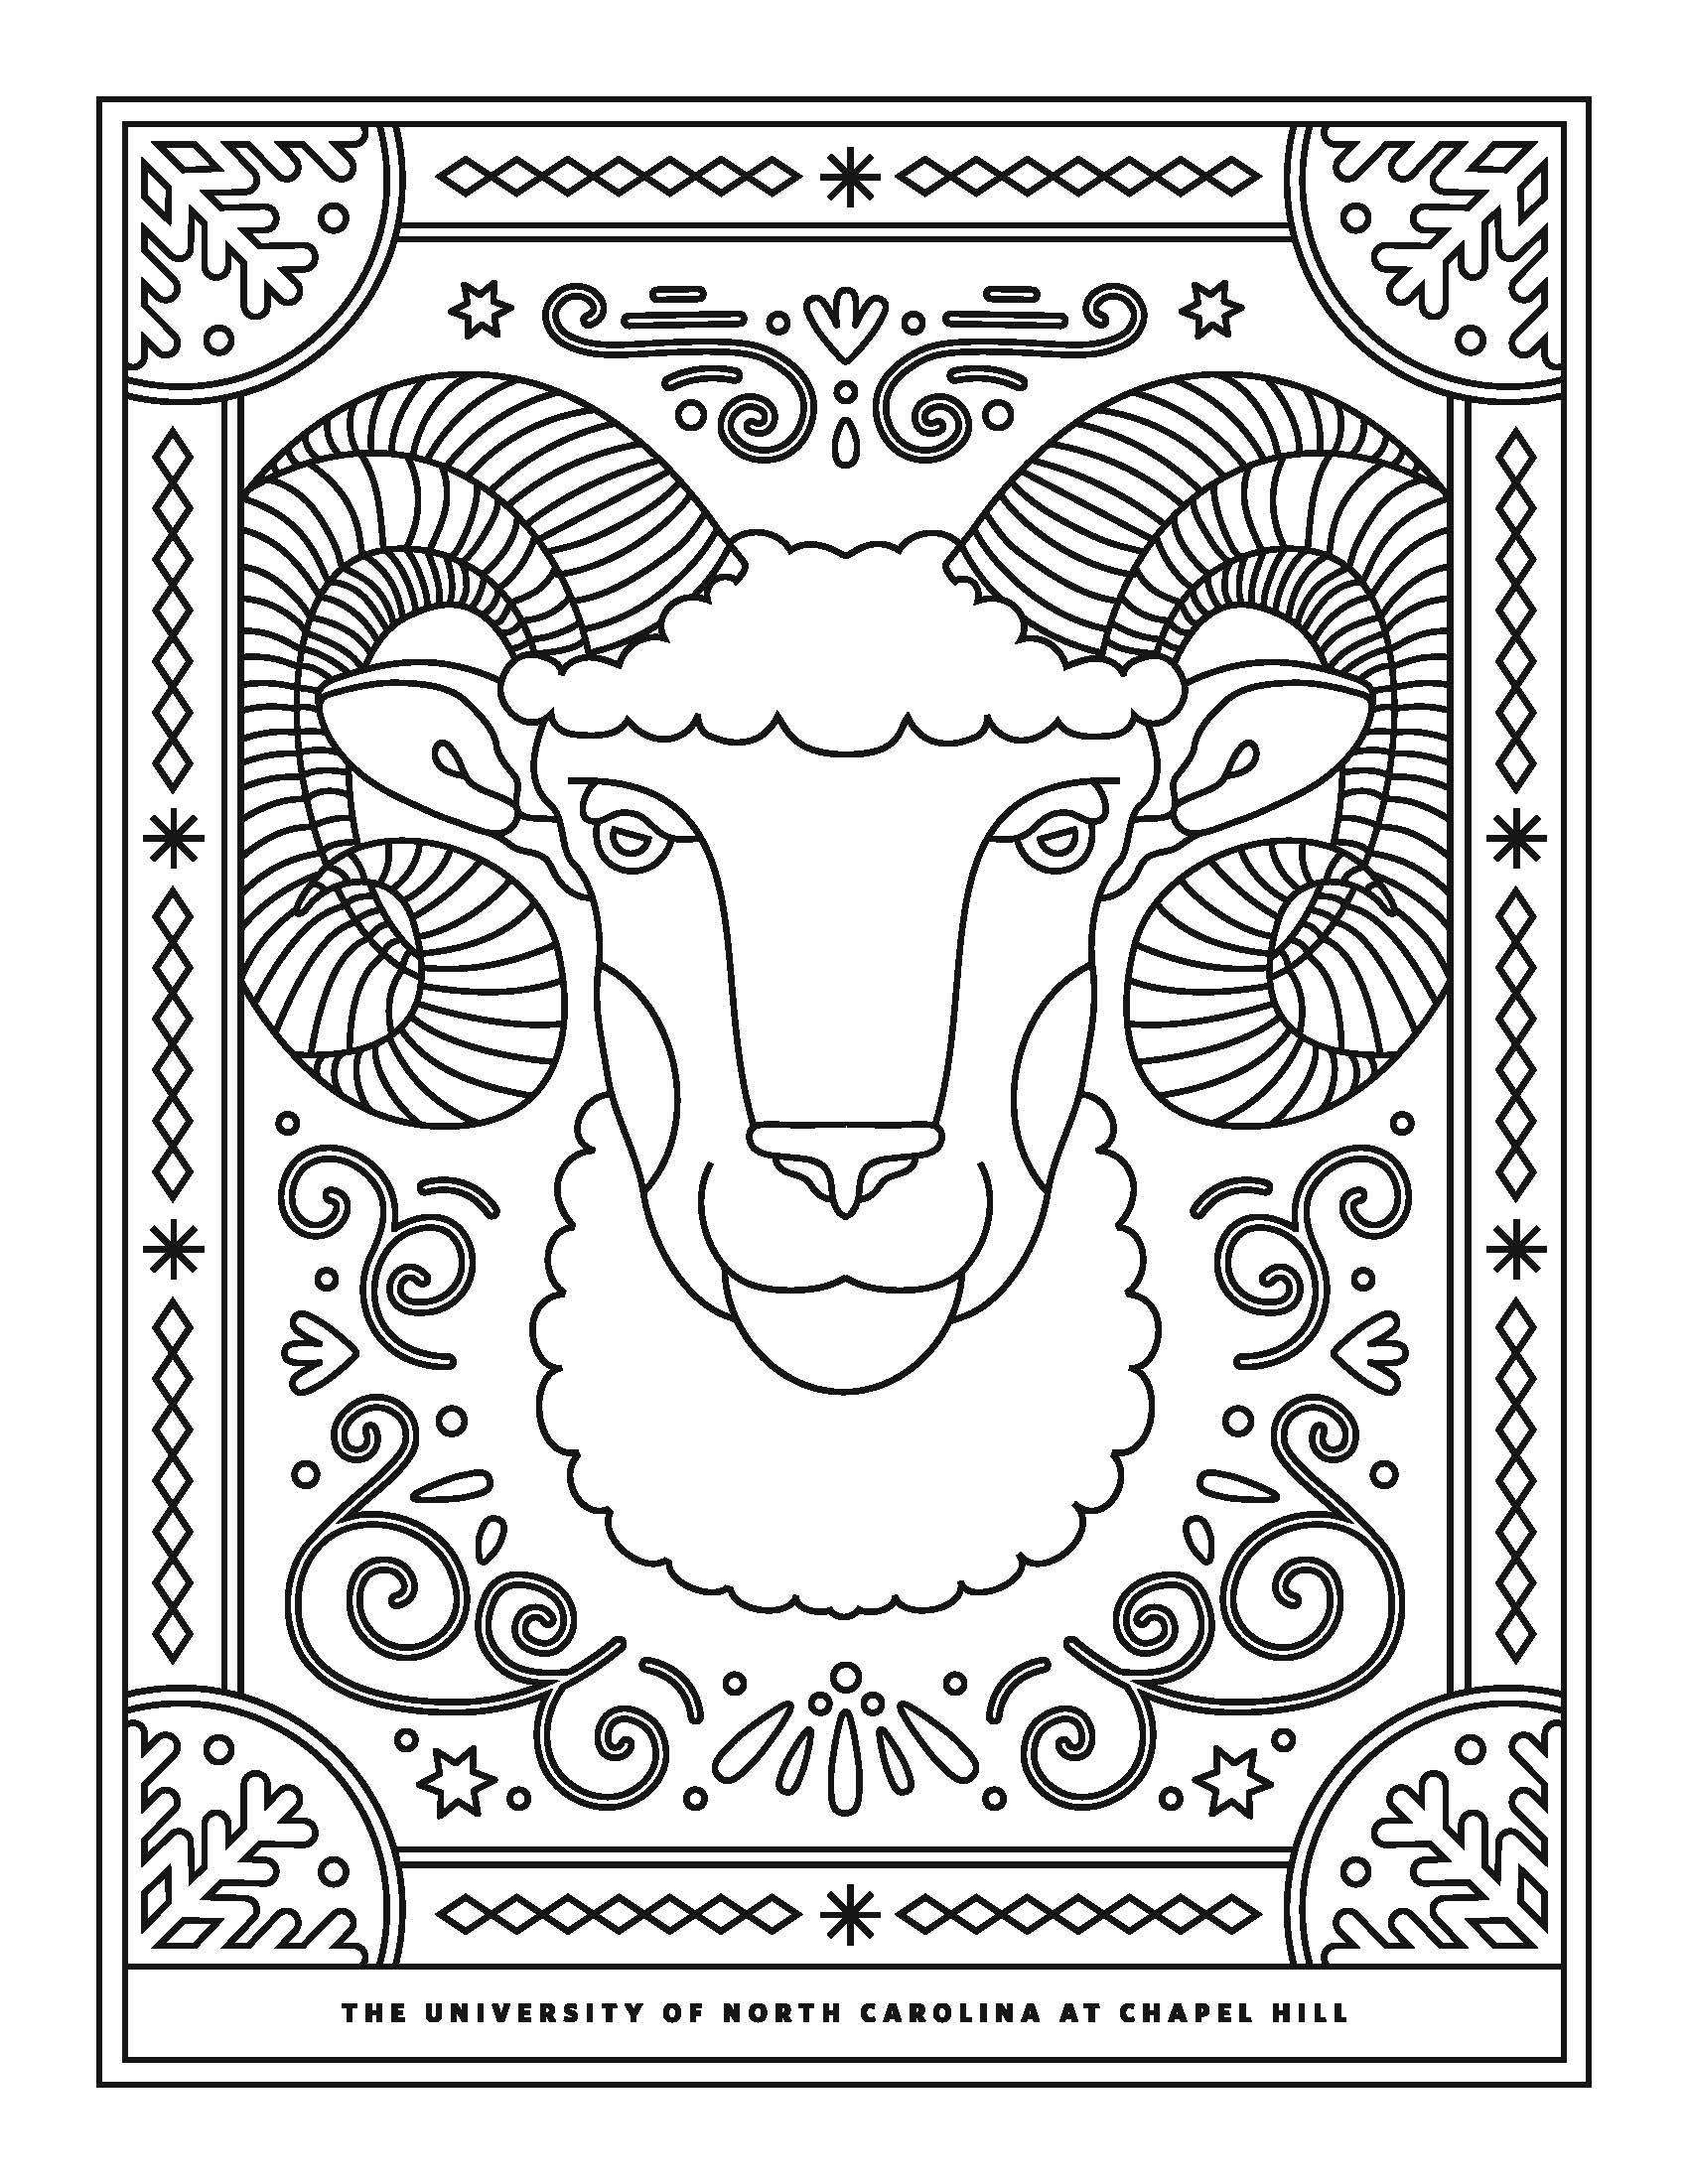 A coloring page of a Rameses ram.